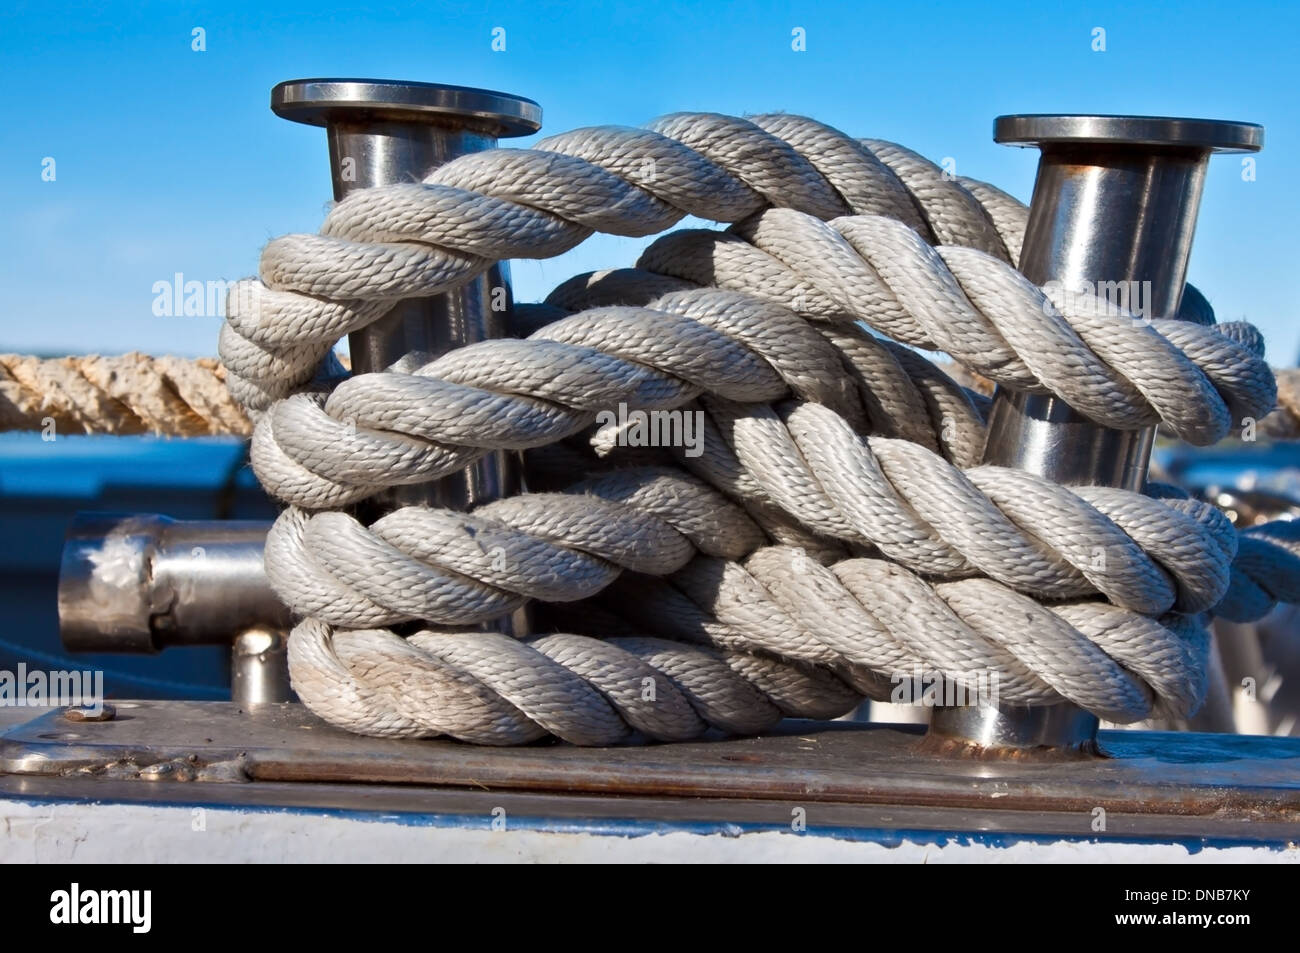 Bundle of rope on the silver mooring bollard on deck Stock Photo